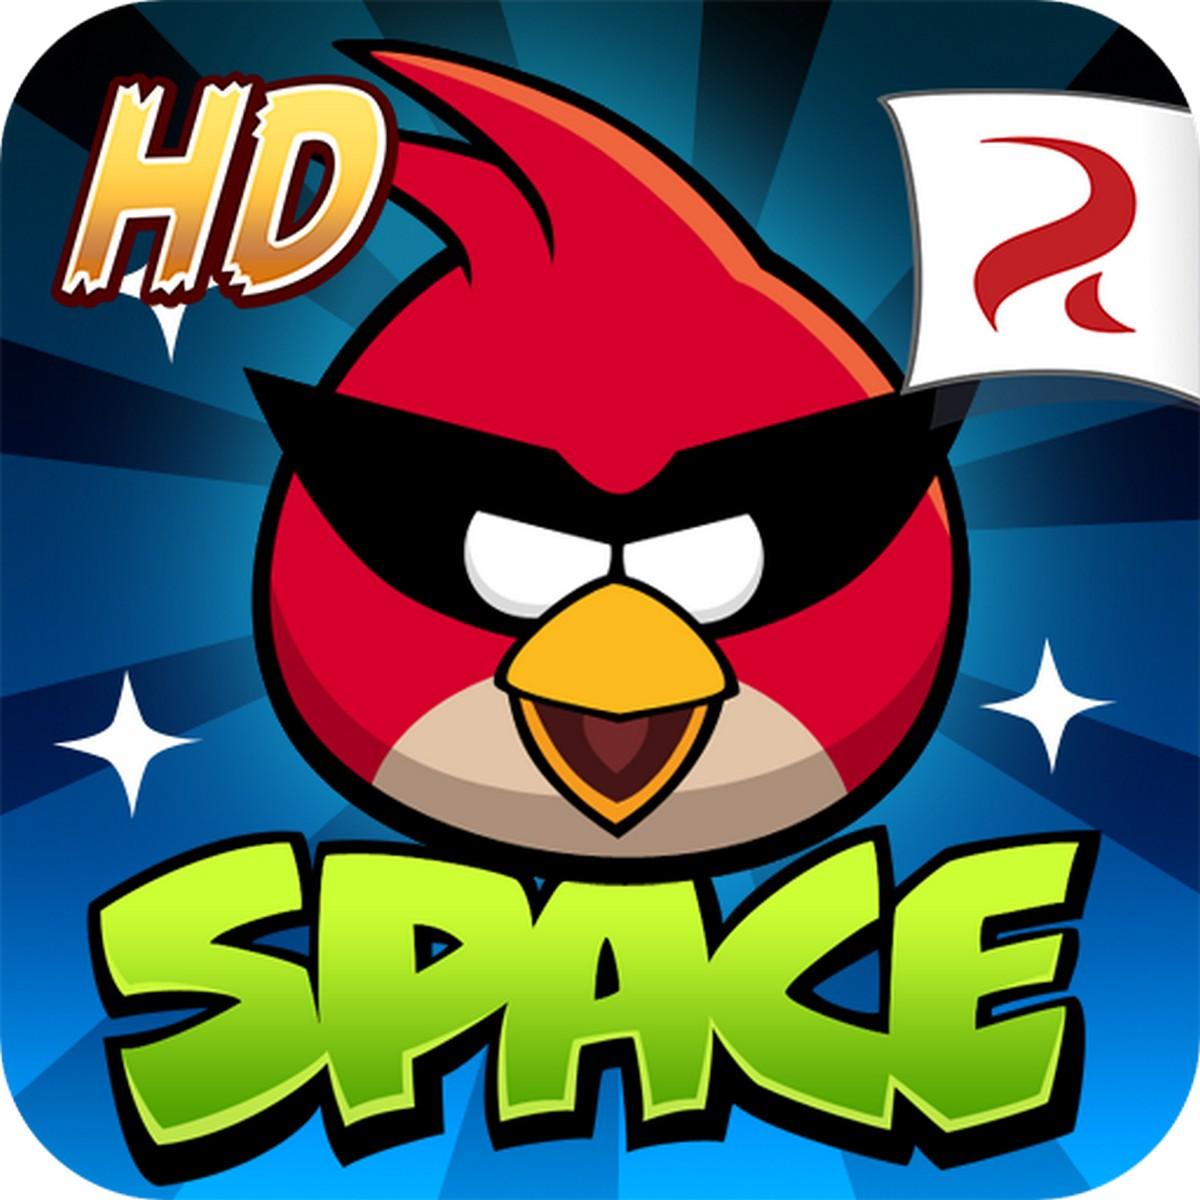 Angry Birds Space HD APK MOD v2.2.14 (Boosters infinitos)